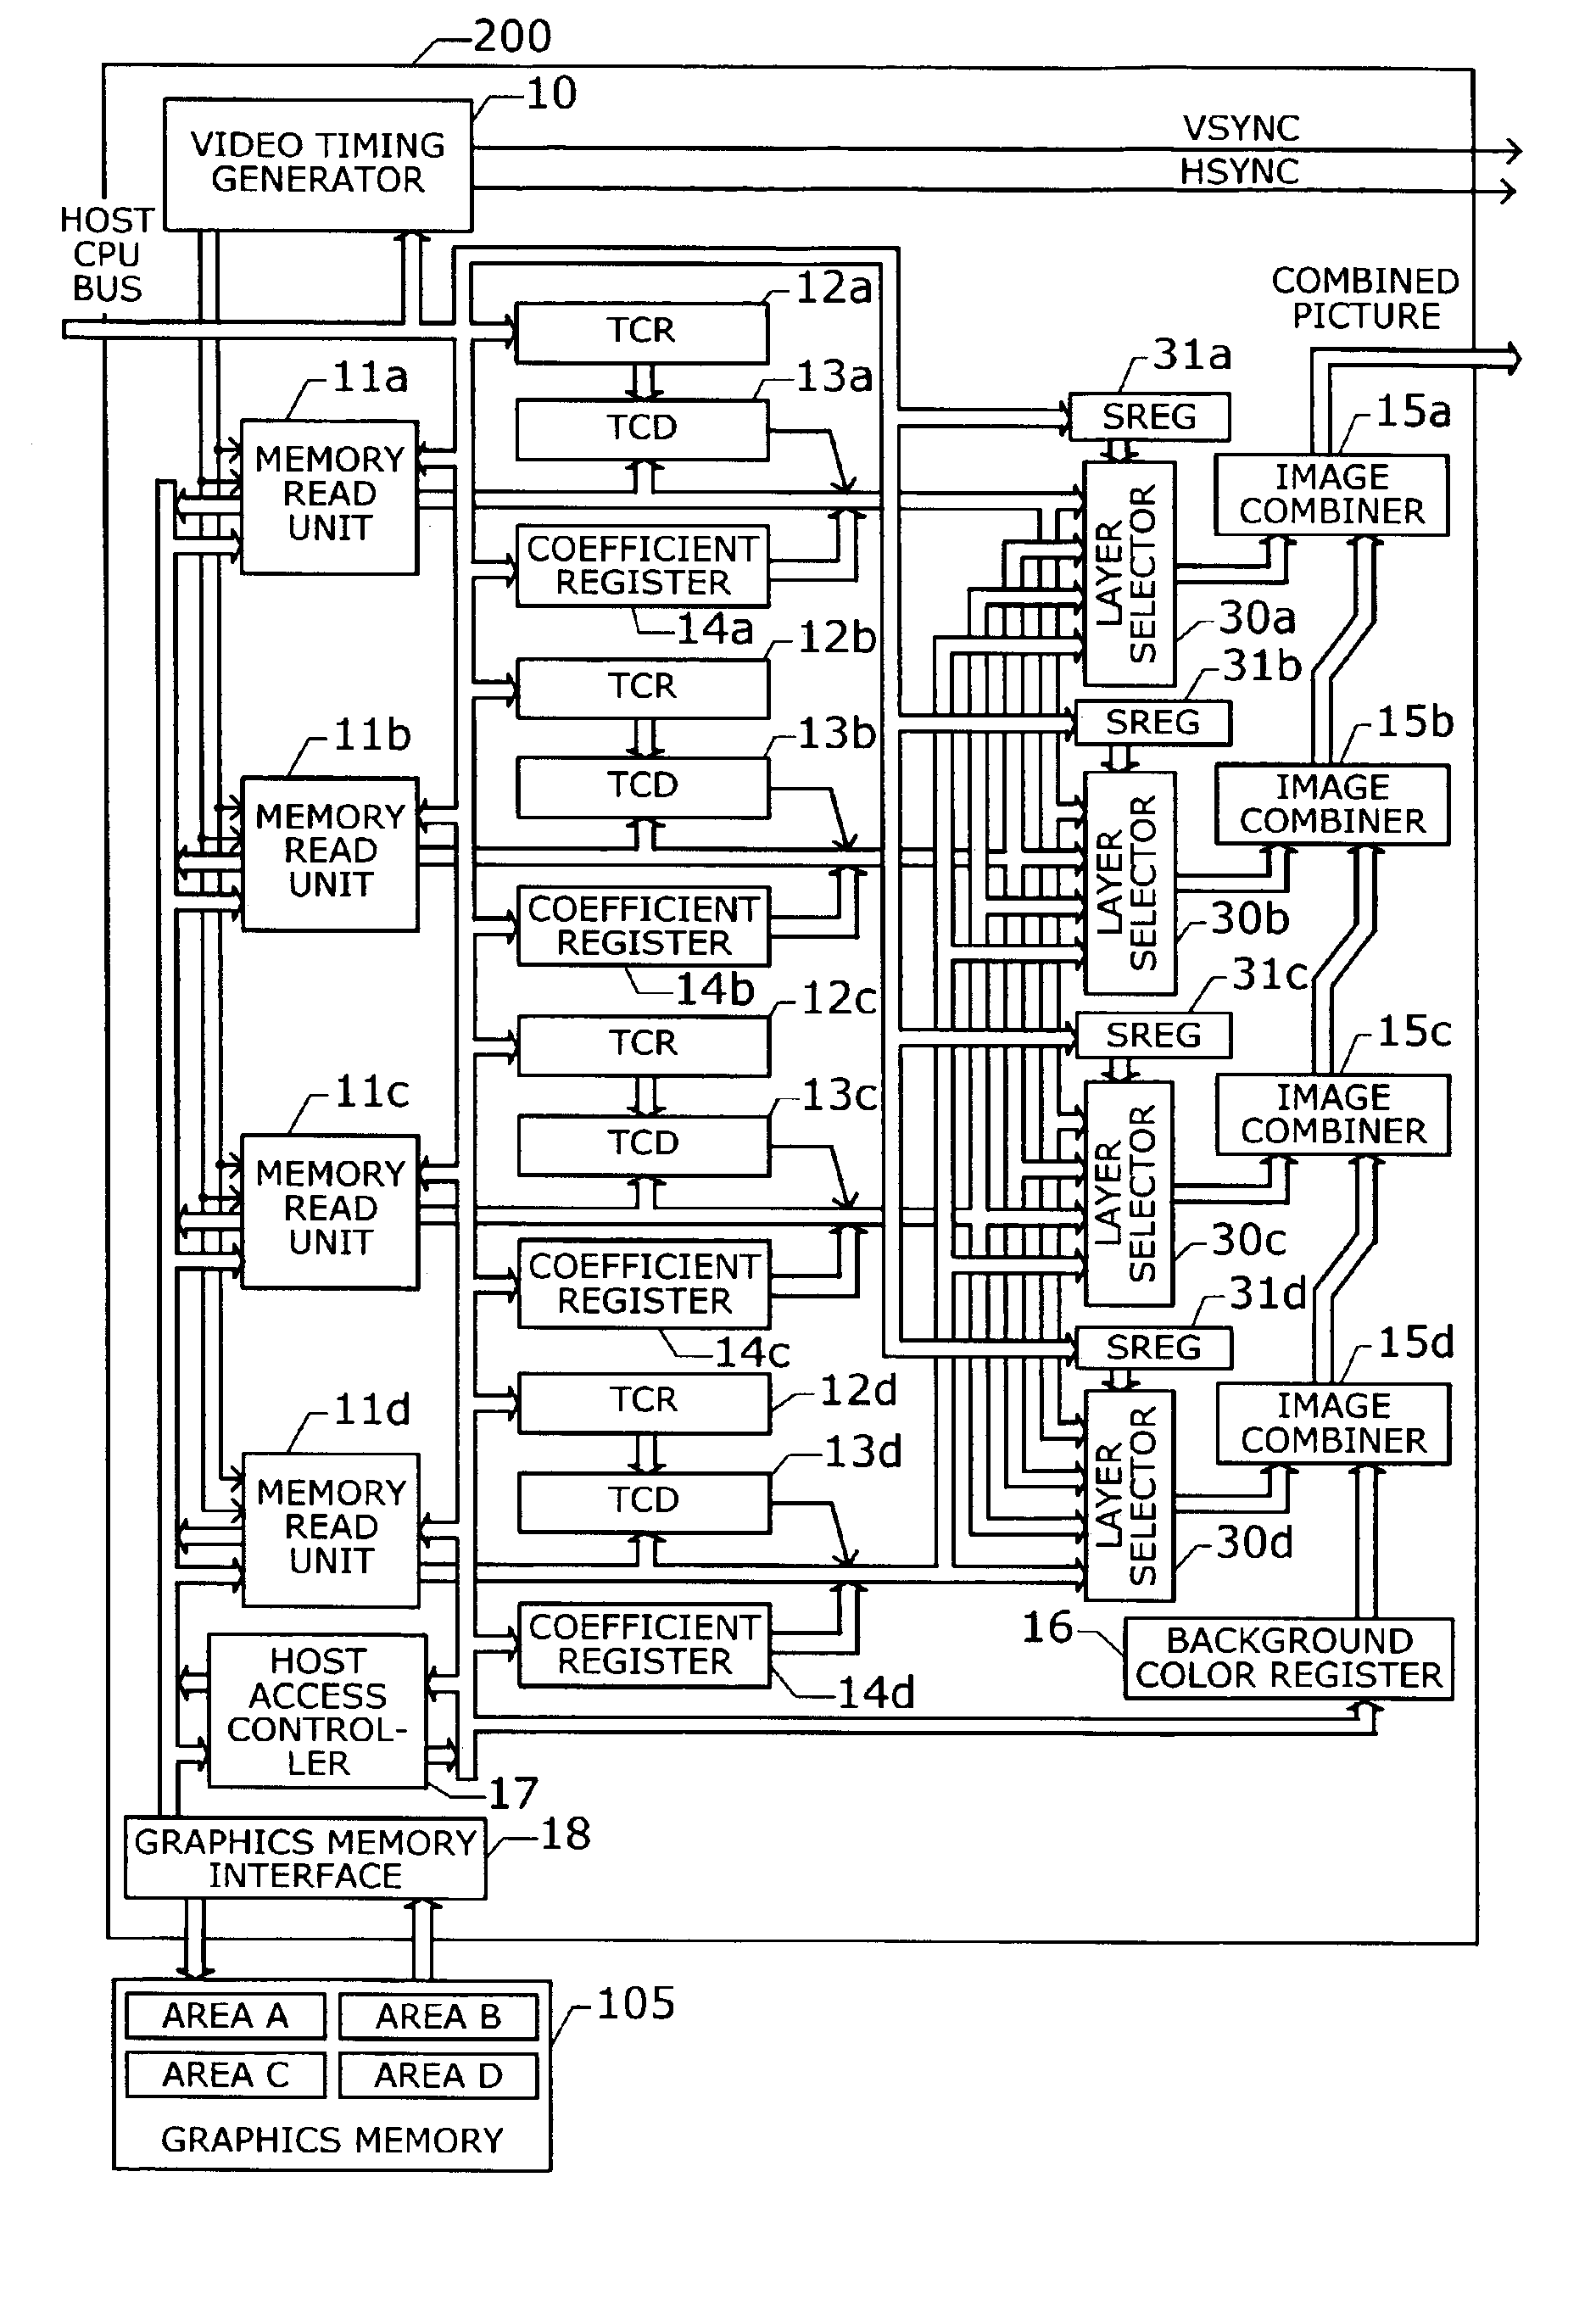 Image processing device for layered graphics